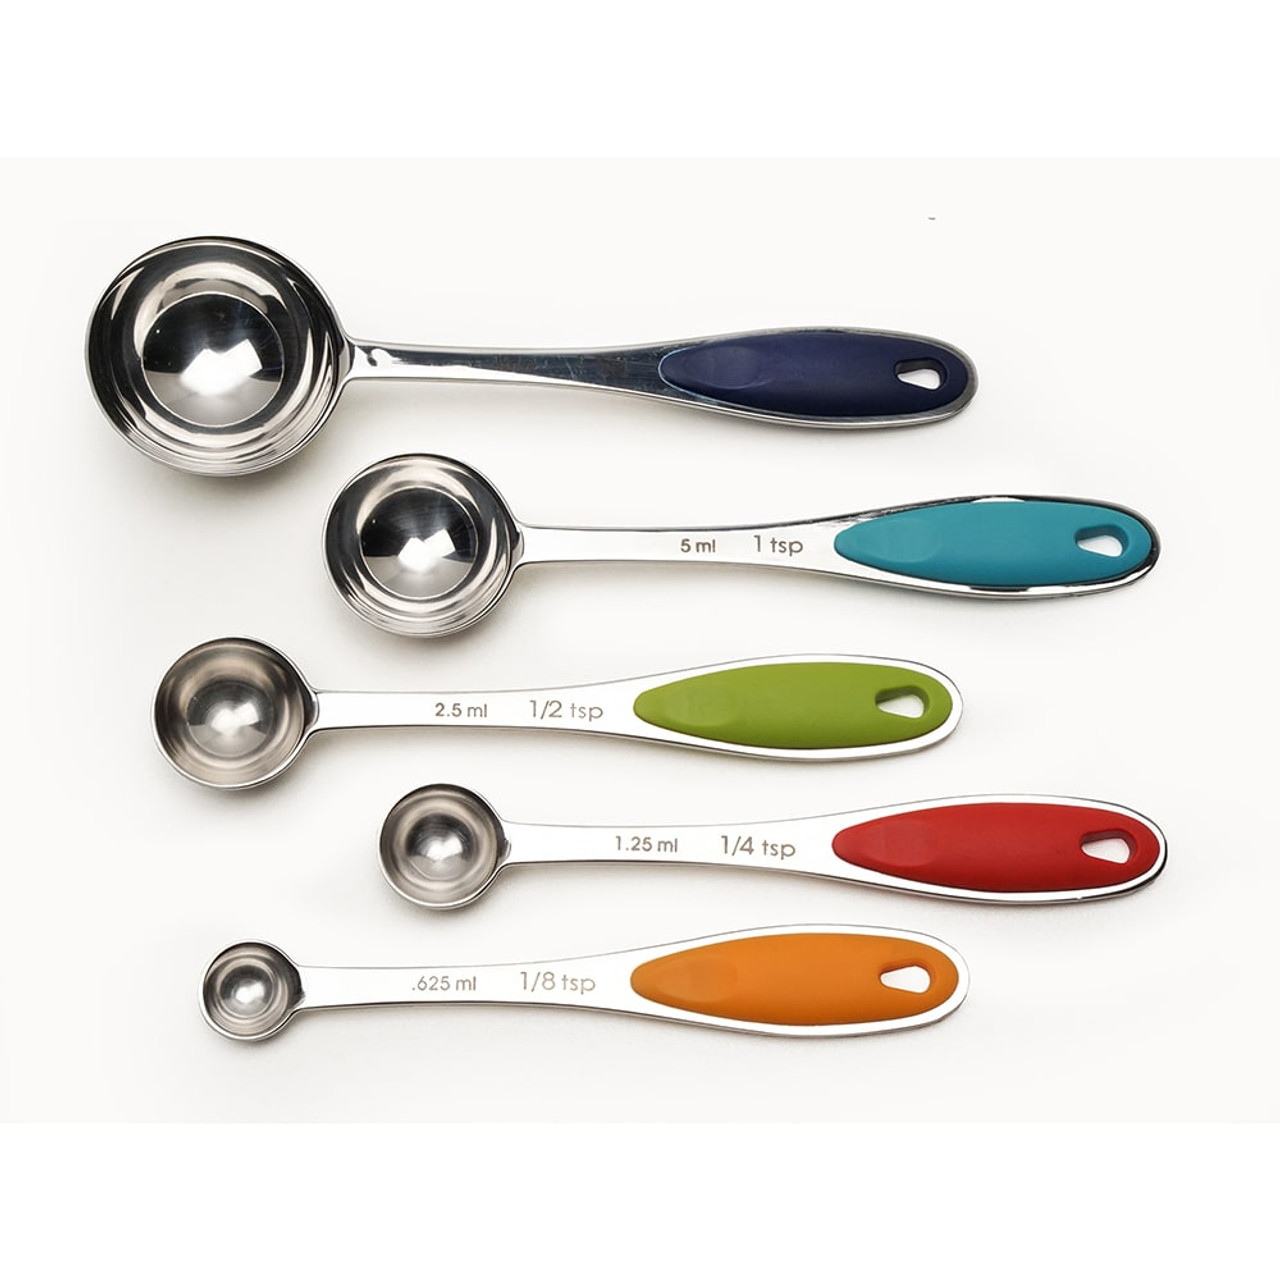 https://cdn11.bigcommerce.com/s-hccytny0od/images/stencil/1280x1280/products/3730/13426/rsvp-endurance-colorful-measuring-spoon-set__36736.1604213102.jpg?c=2?imbypass=on